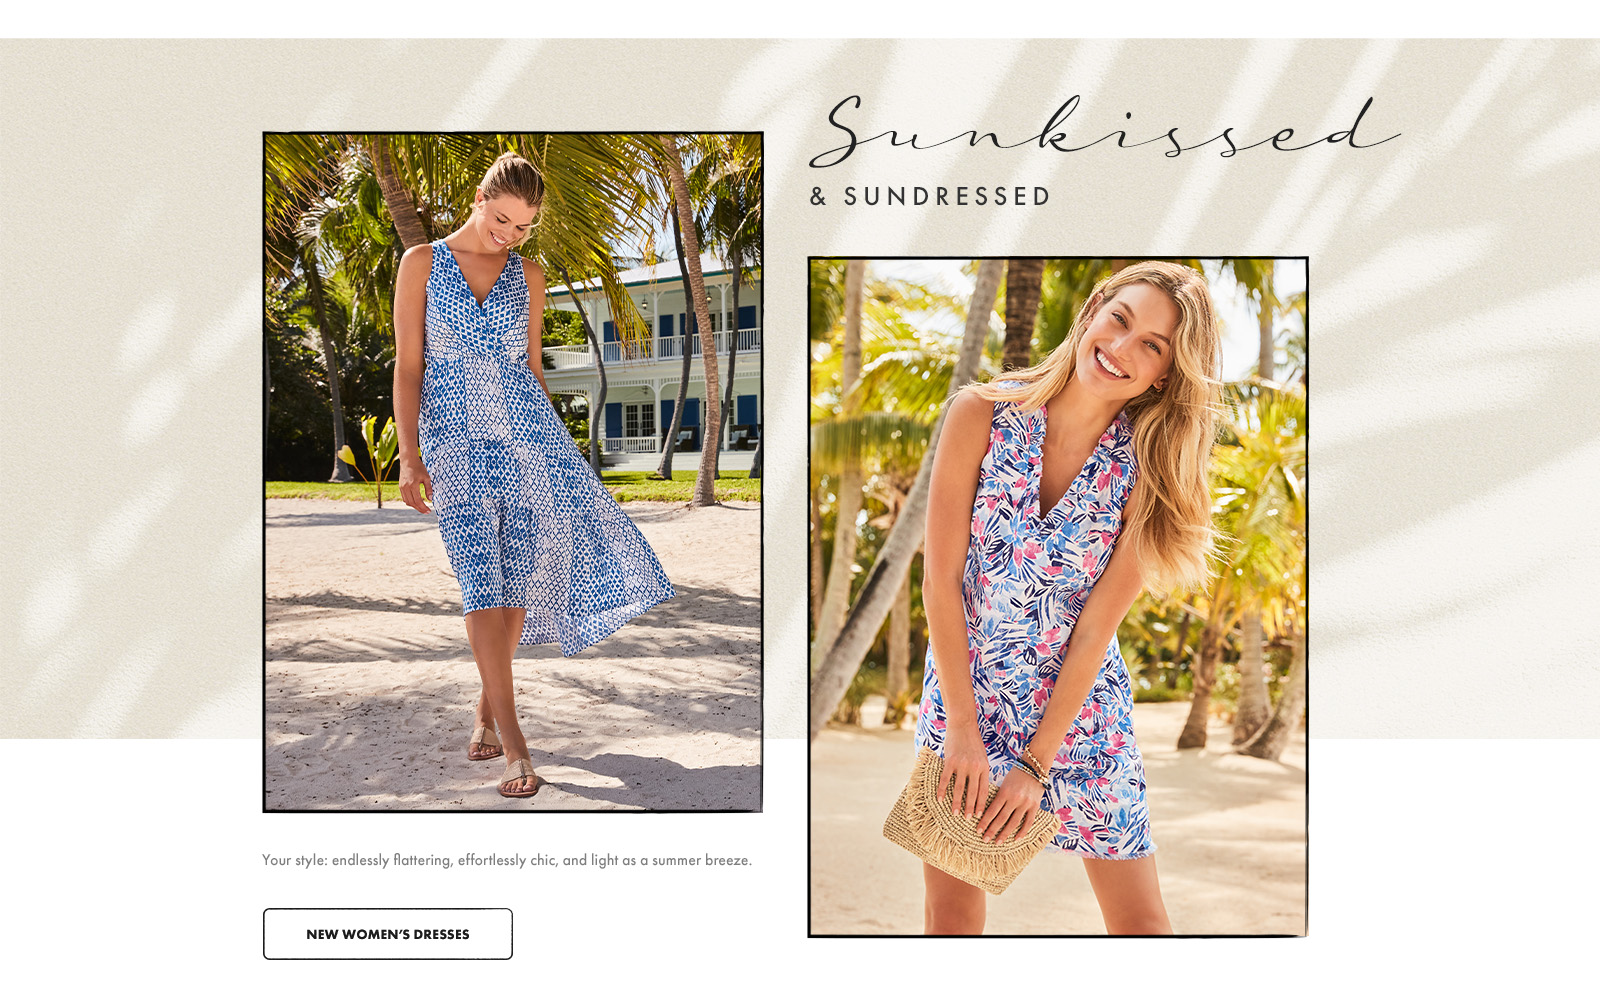 Your style: endlessly flattering, effortlessly chic, and light as a summer breeze. 